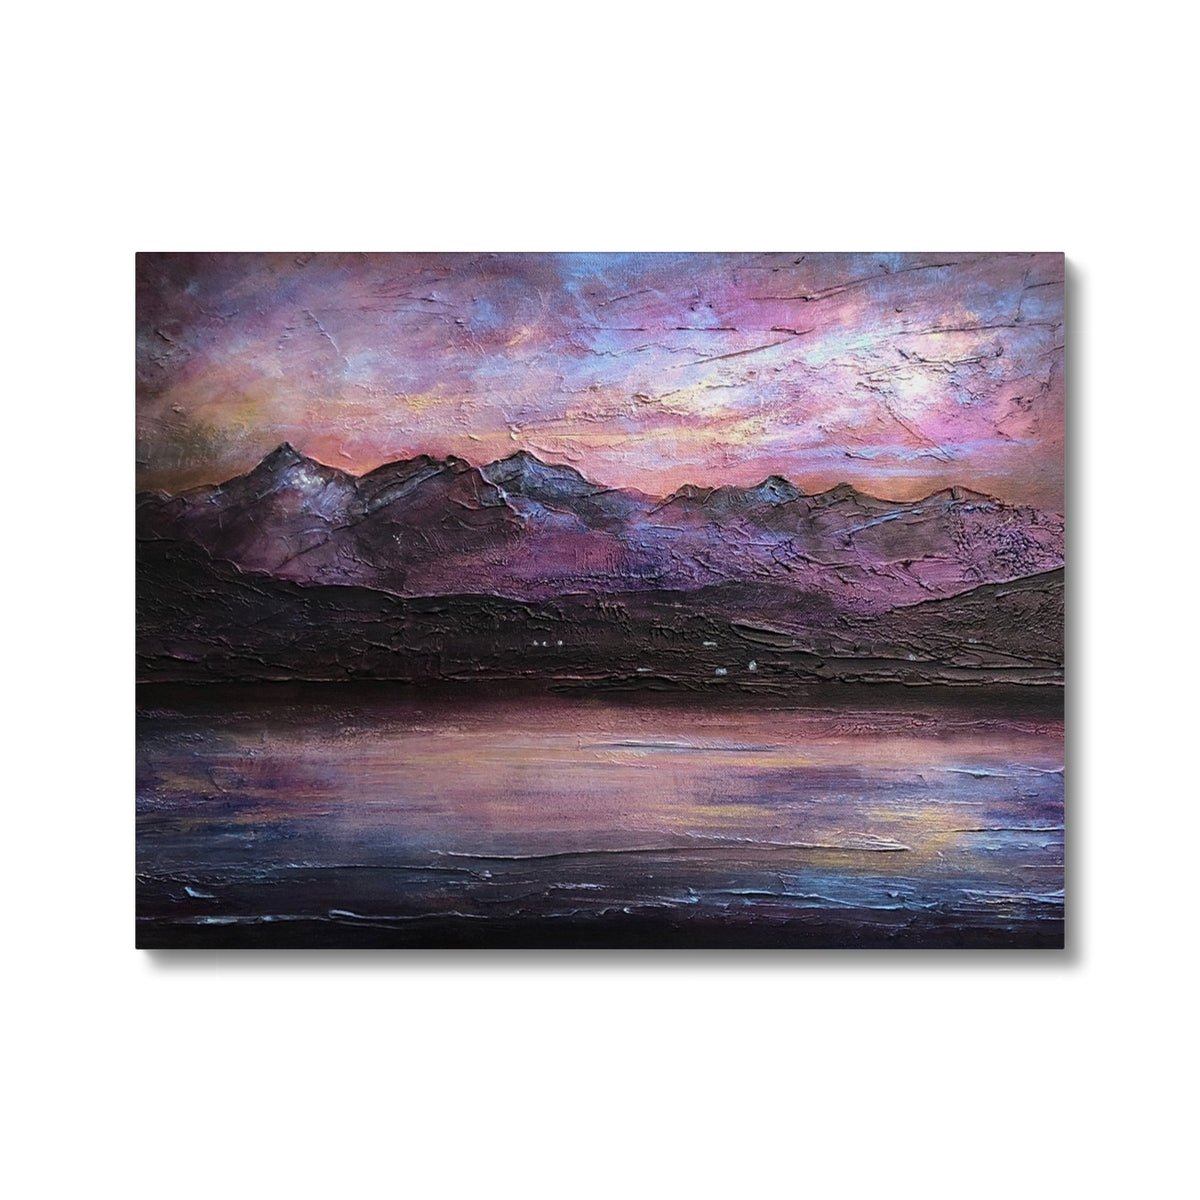 Last Skye Light Painting | Canvas From Scotland-Contemporary Stretched Canvas Prints-Skye Art Gallery-24"x18"-Paintings, Prints, Homeware, Art Gifts From Scotland By Scottish Artist Kevin Hunter